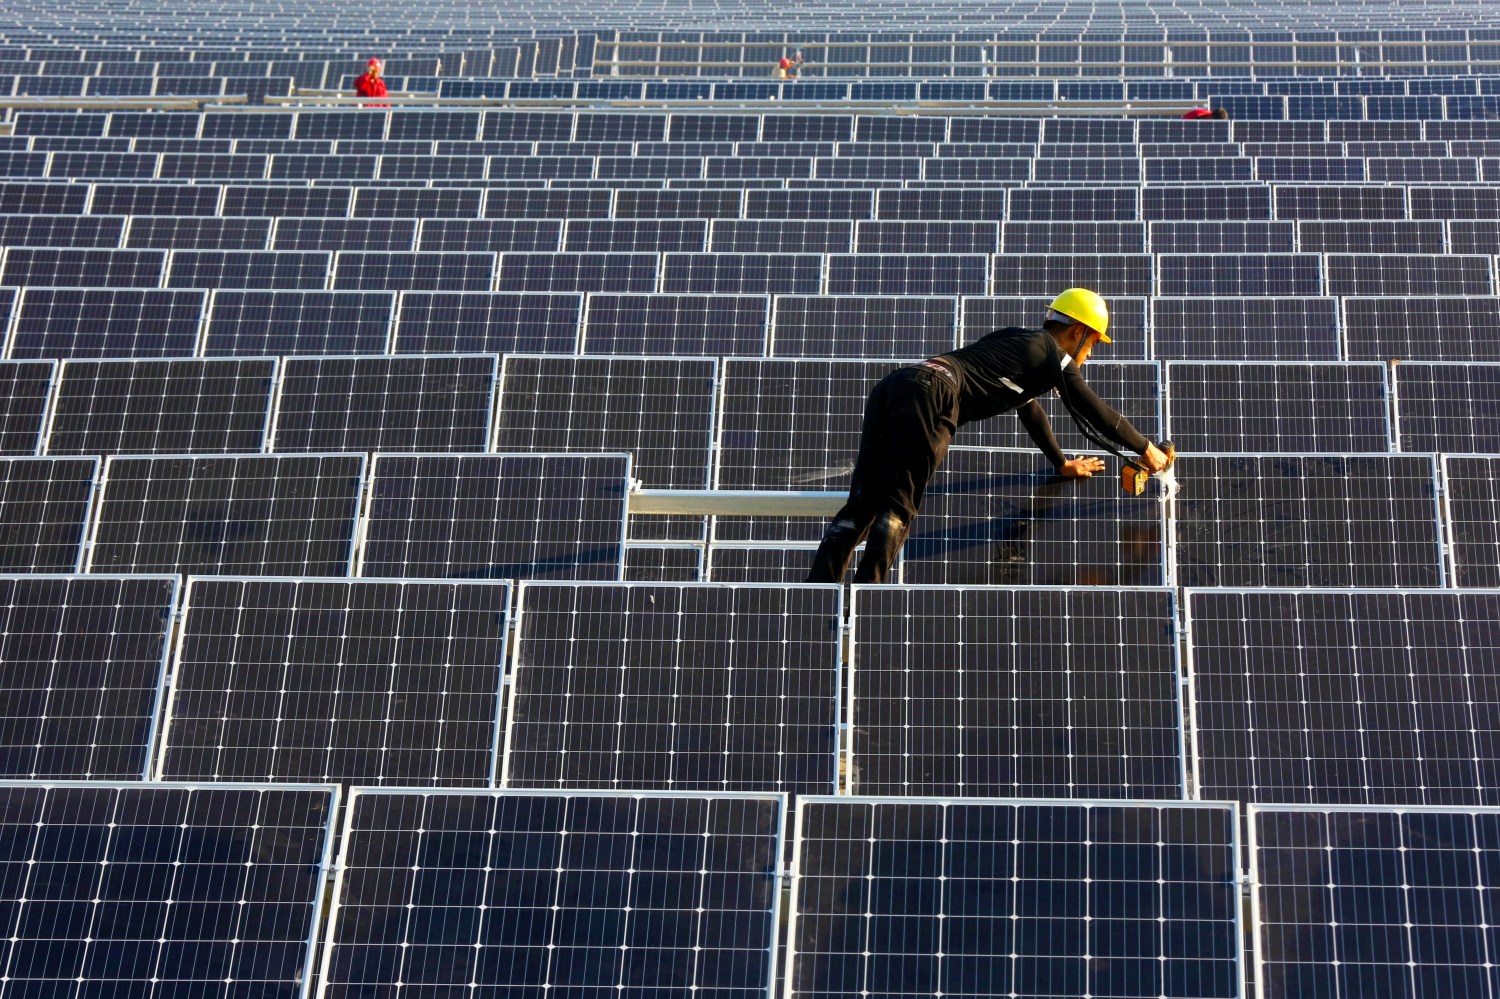 A man works on solar panels at a solar power plant of China Huaneng Group in Huaiyin, Jiangsu province, China June 13, 2018.  REUTERS/Stringer ATTENTION EDITORS - THIS IMAGE WAS PROVIDED BY A THIRD PARTY. CHINA OUT. - RC135BDD6120